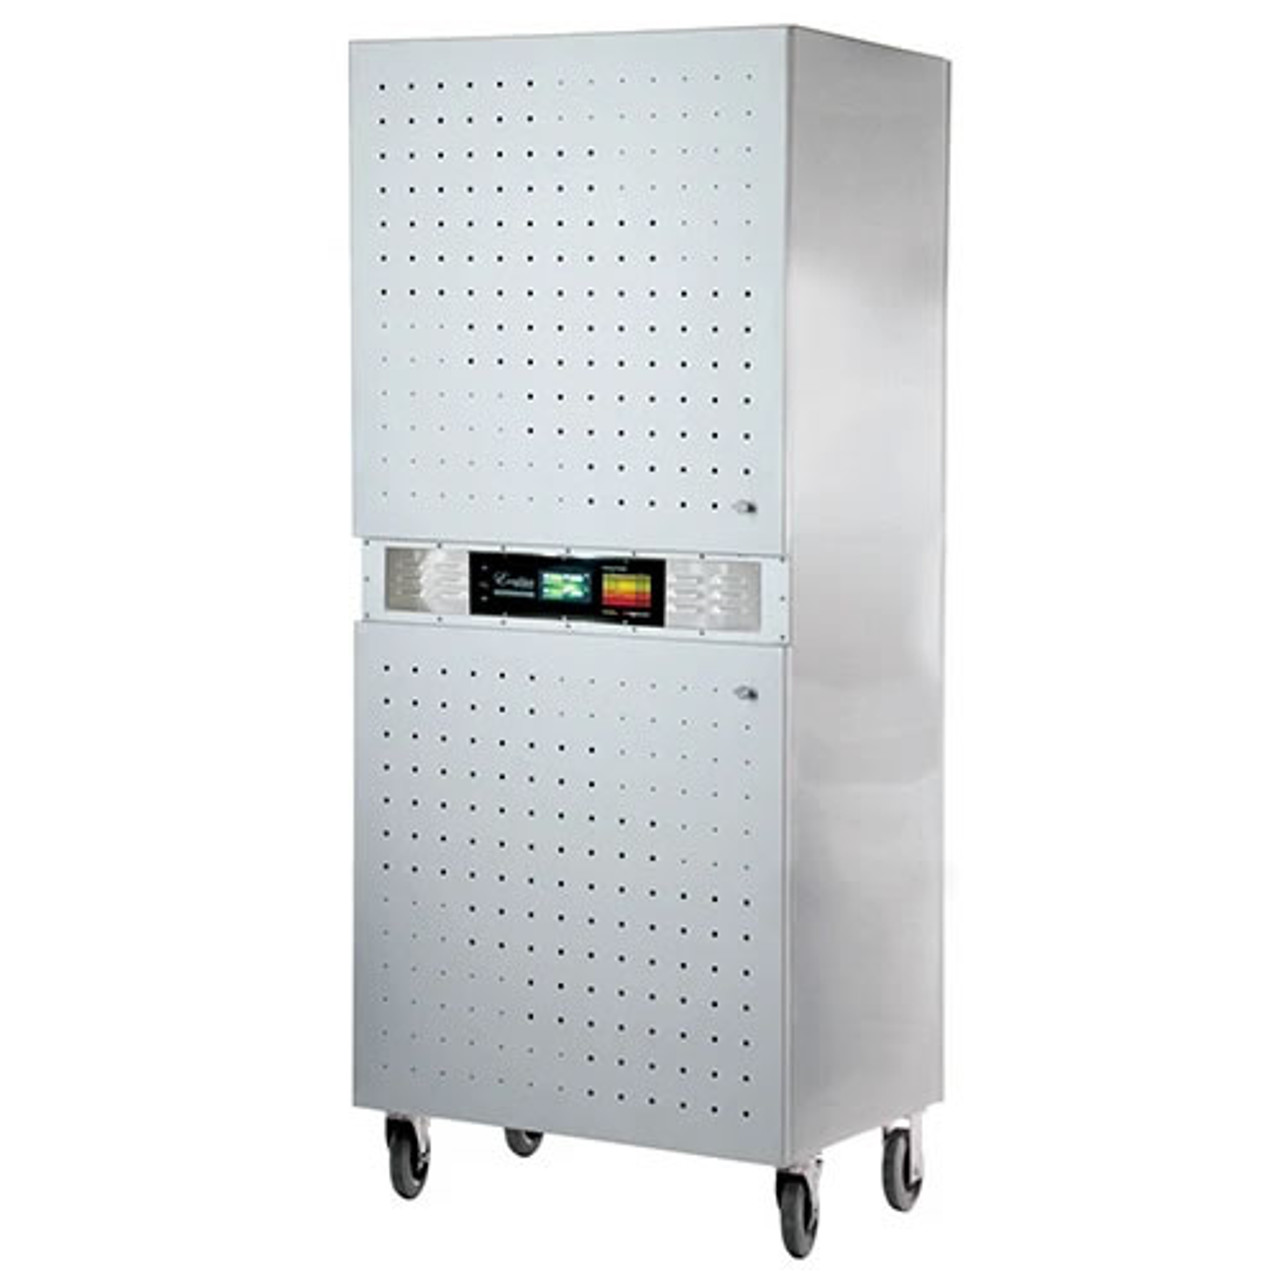 https://cdn11.bigcommerce.com/s-3n1nnt5qyw/images/stencil/1280x1280/products/9689/10853/excalibur-ss-commercial-food-dehydrator-2-zone-nsf-model-com2-24__20269.1629750701.jpg?c=1